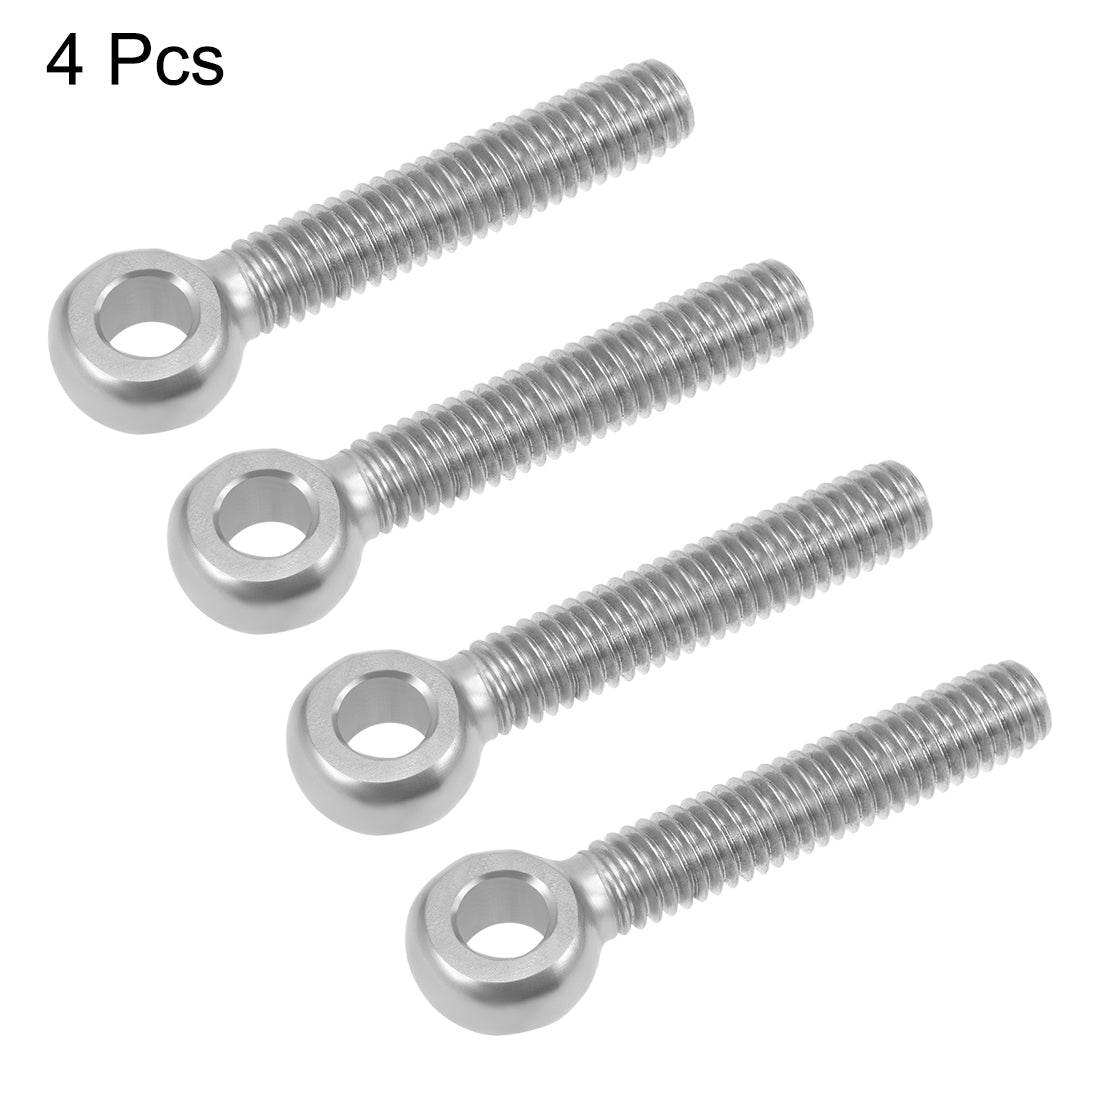 uxcell Uxcell M6 x 35mm Machinery Shoulder Swing Lifting Eye Bolt 304 Stainless Steel Metric Thread 4pcs